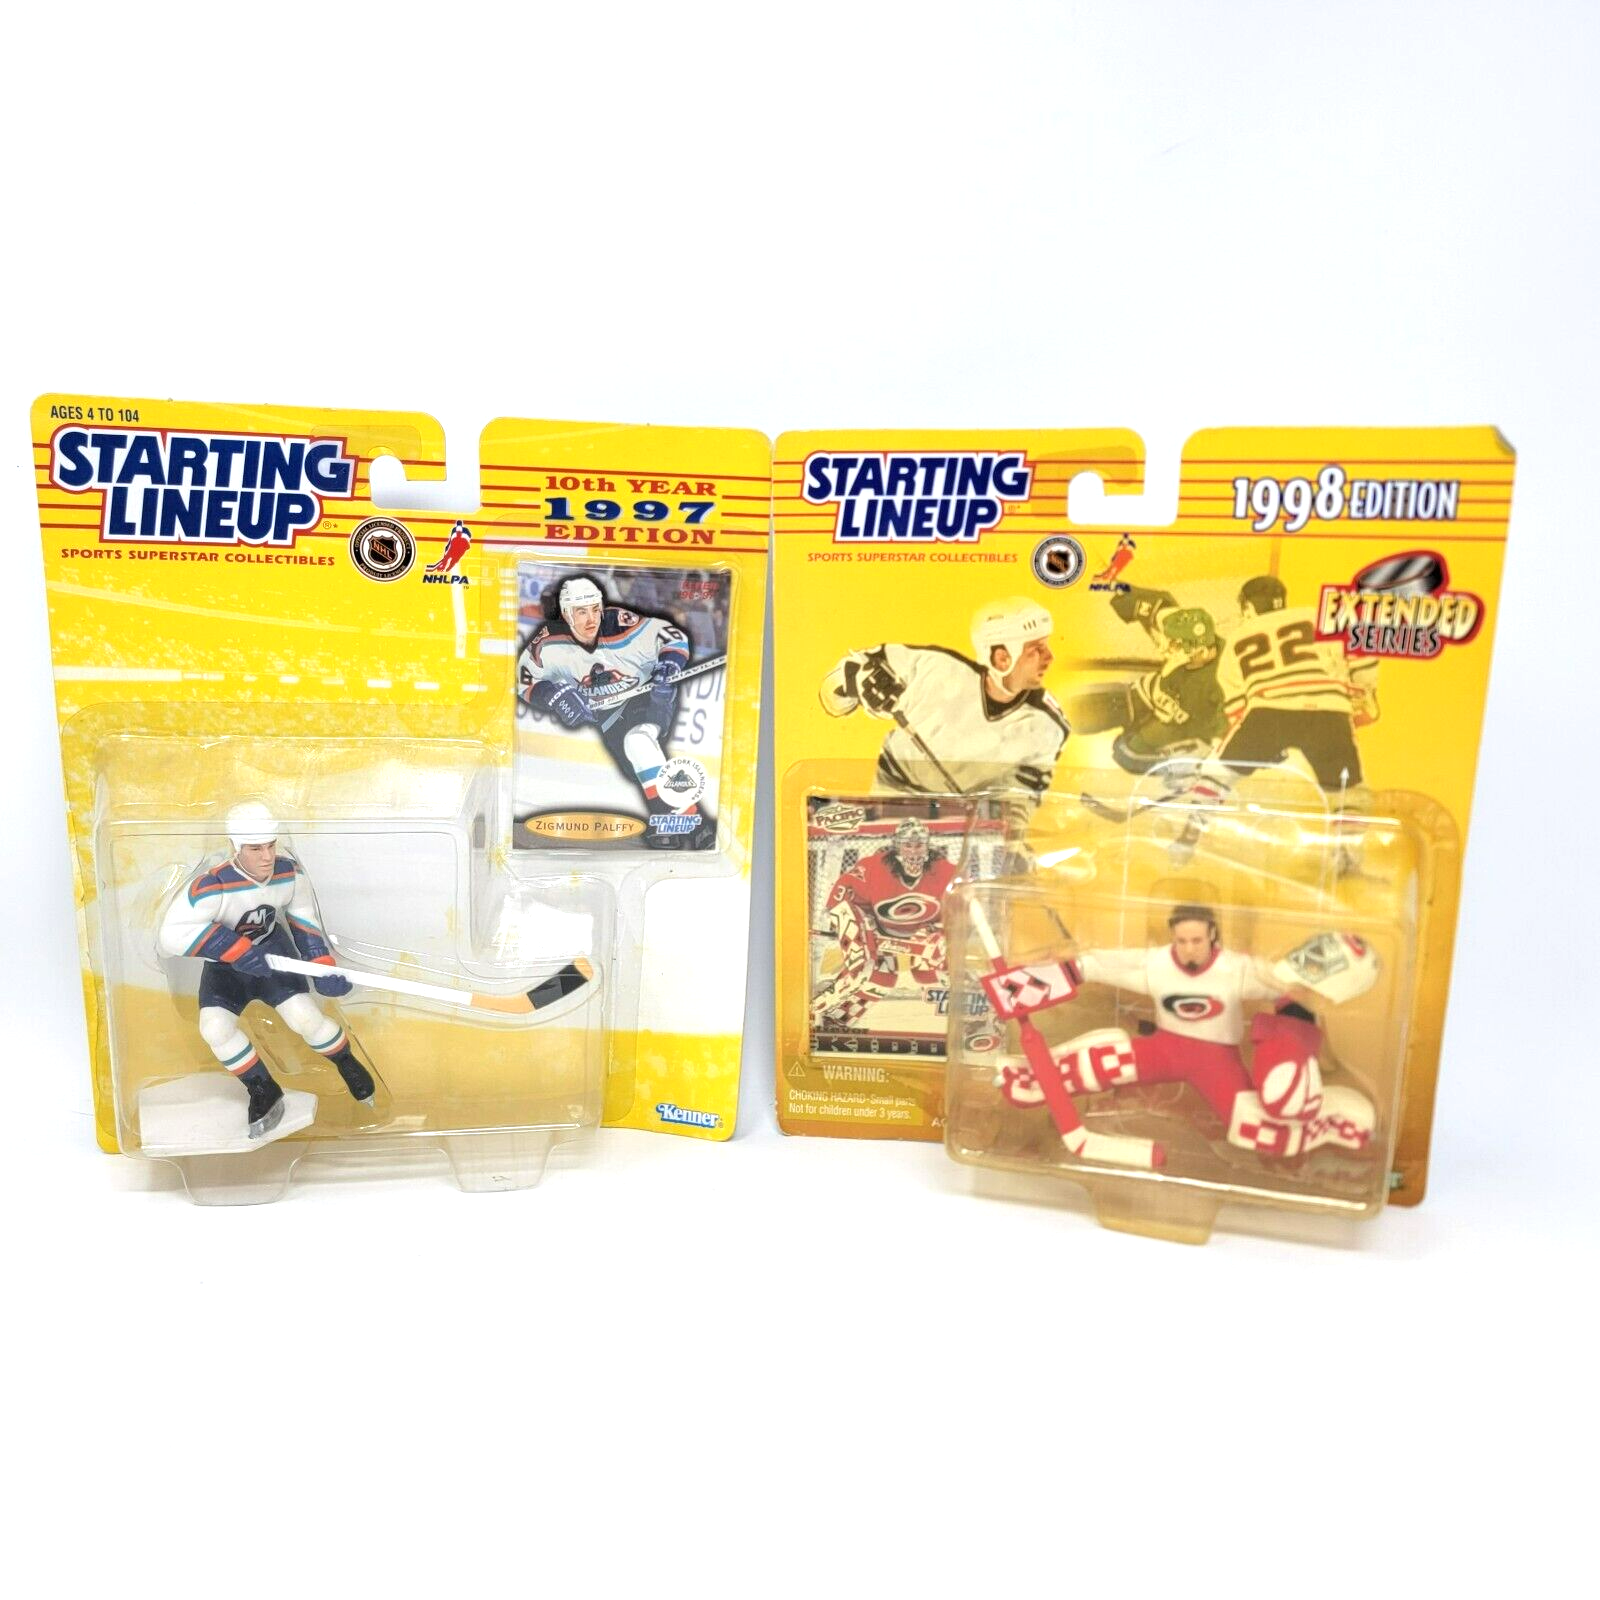 Primary image for Starting Lineup Kenner 1997 1998 NHL Palffy Kidd Lot of 2 Players Figures